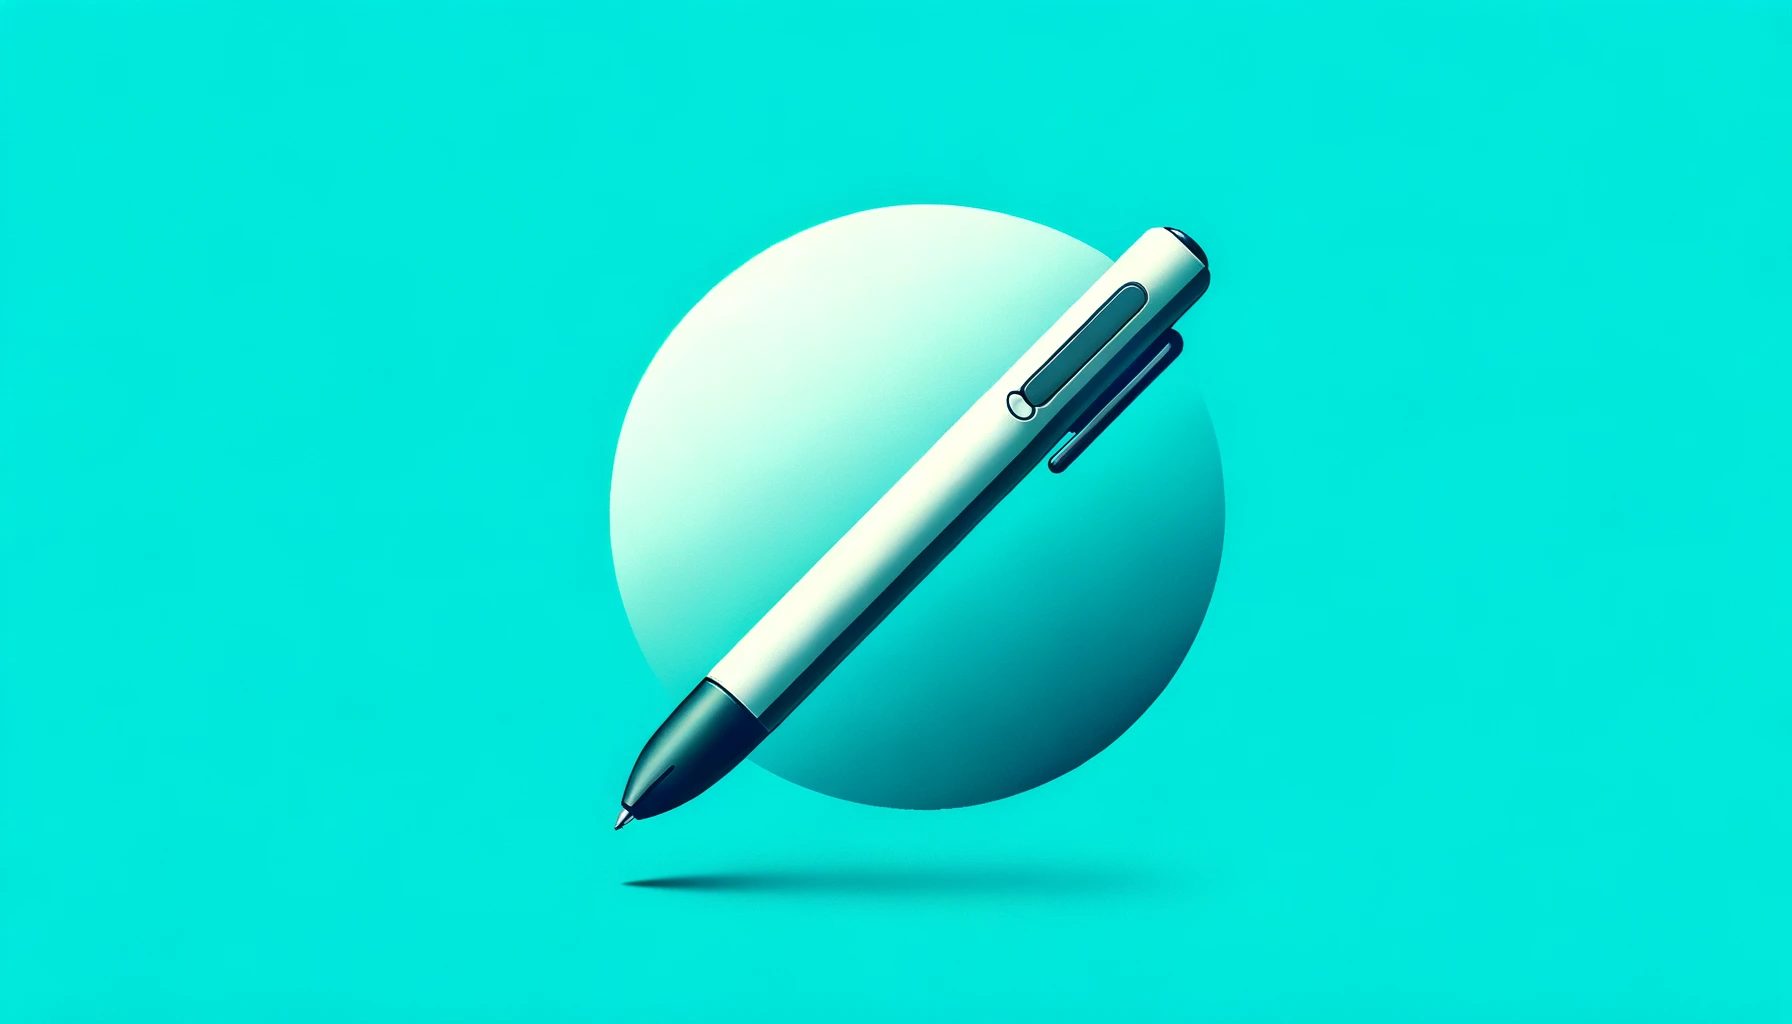 Stylus pen over turquoise sphere on blue background.